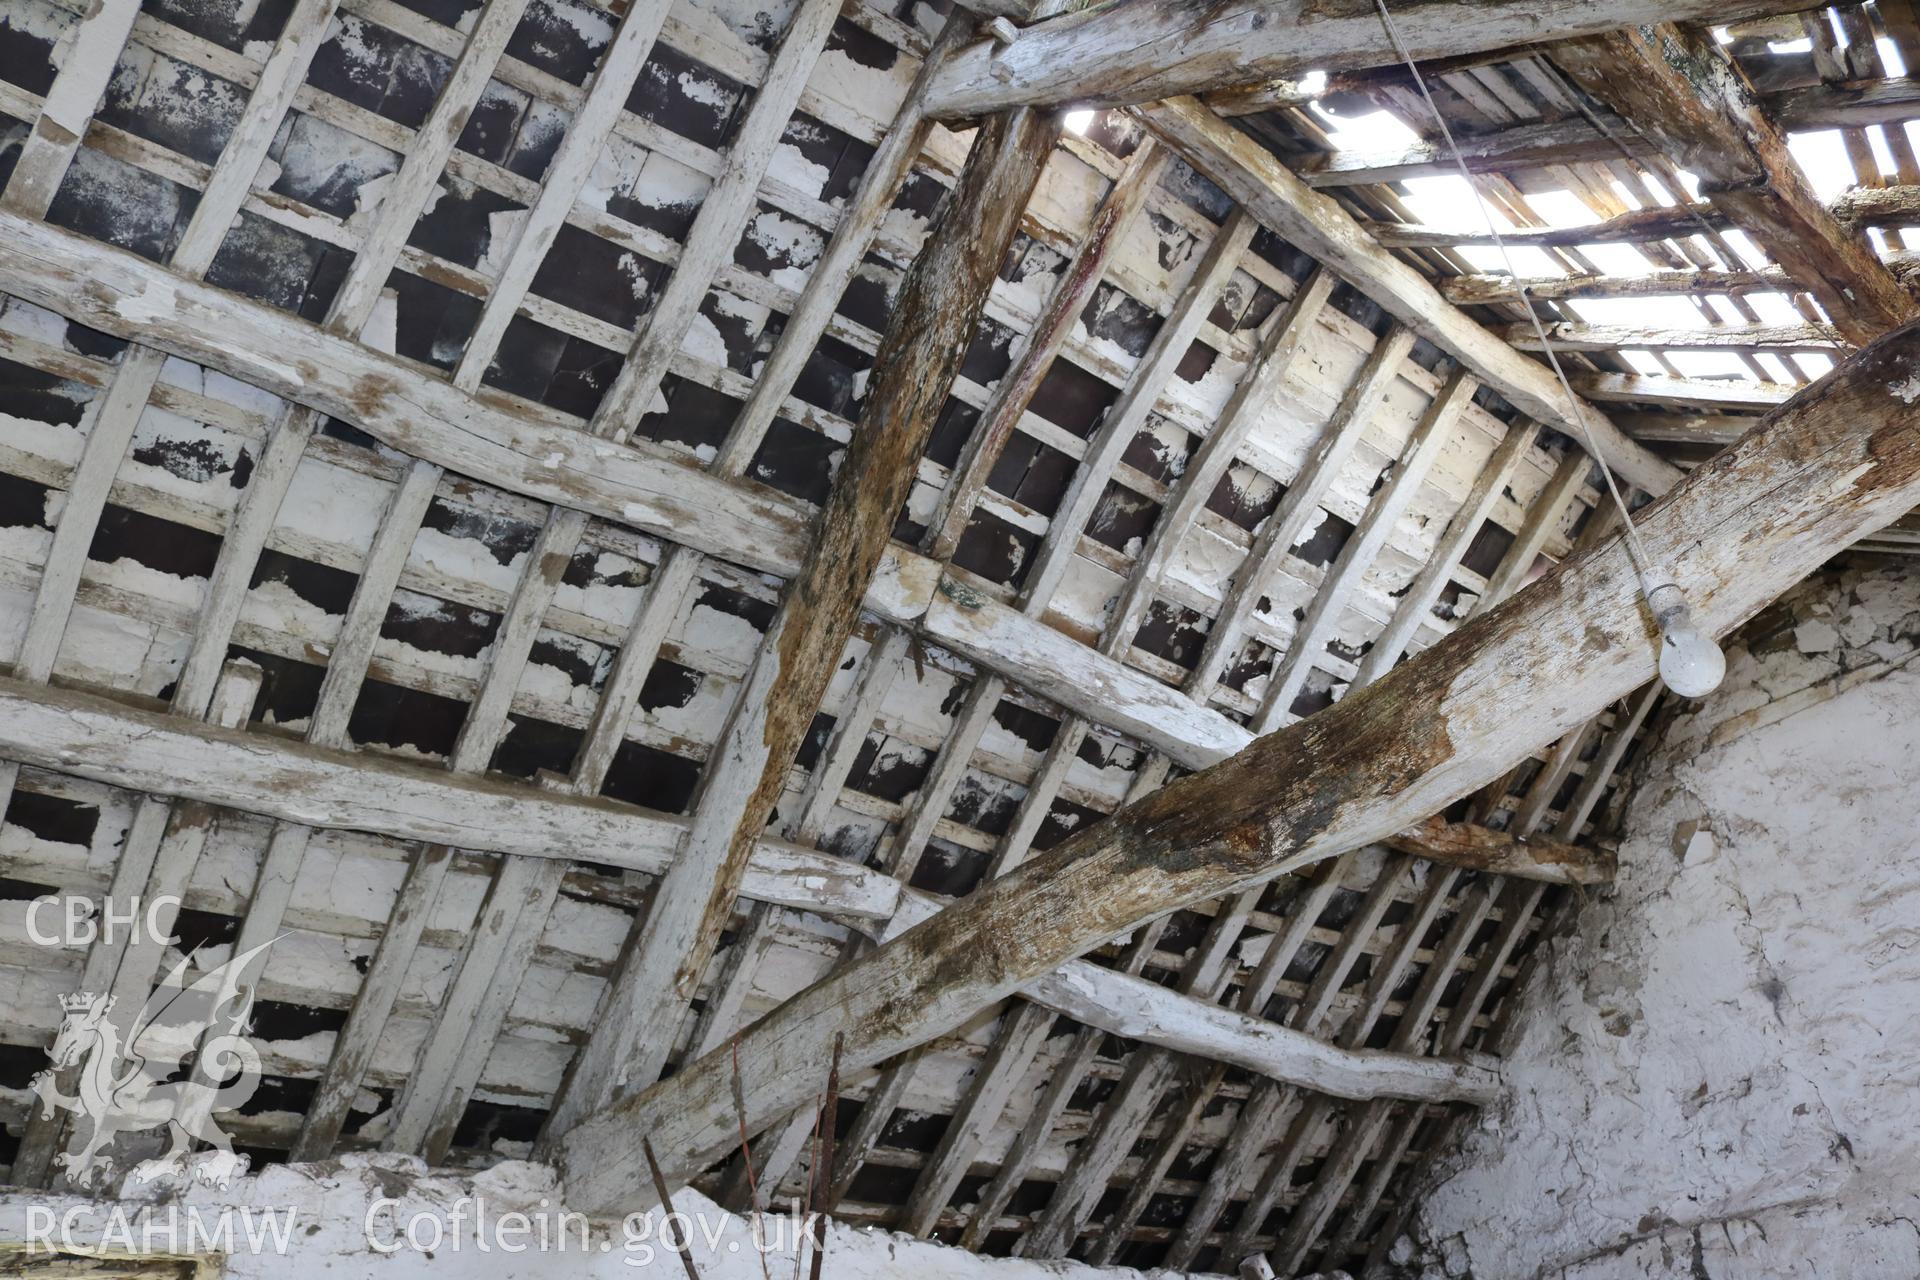 Photograph showing interior view of dairy roof, at Maes yr Hendre, taken by Dr Marian Gwyn, 6th July 2016. (Original Reference no. 0247)